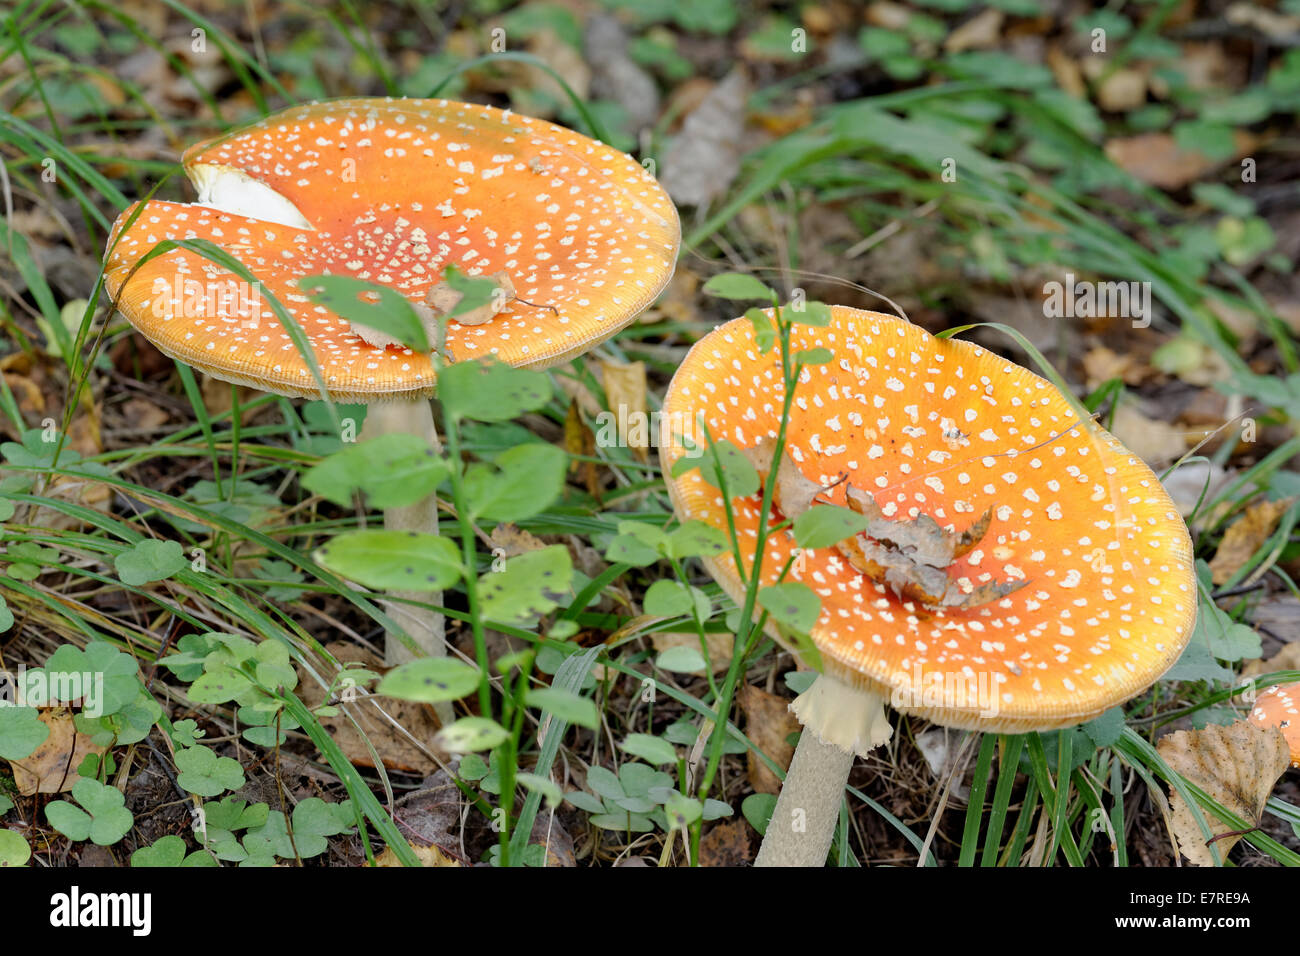 Amanita muscaria, commonly known as the fly agaric or fly amanita, is a poisonous and psychoactive basidiomycete fungus. Stock Photo